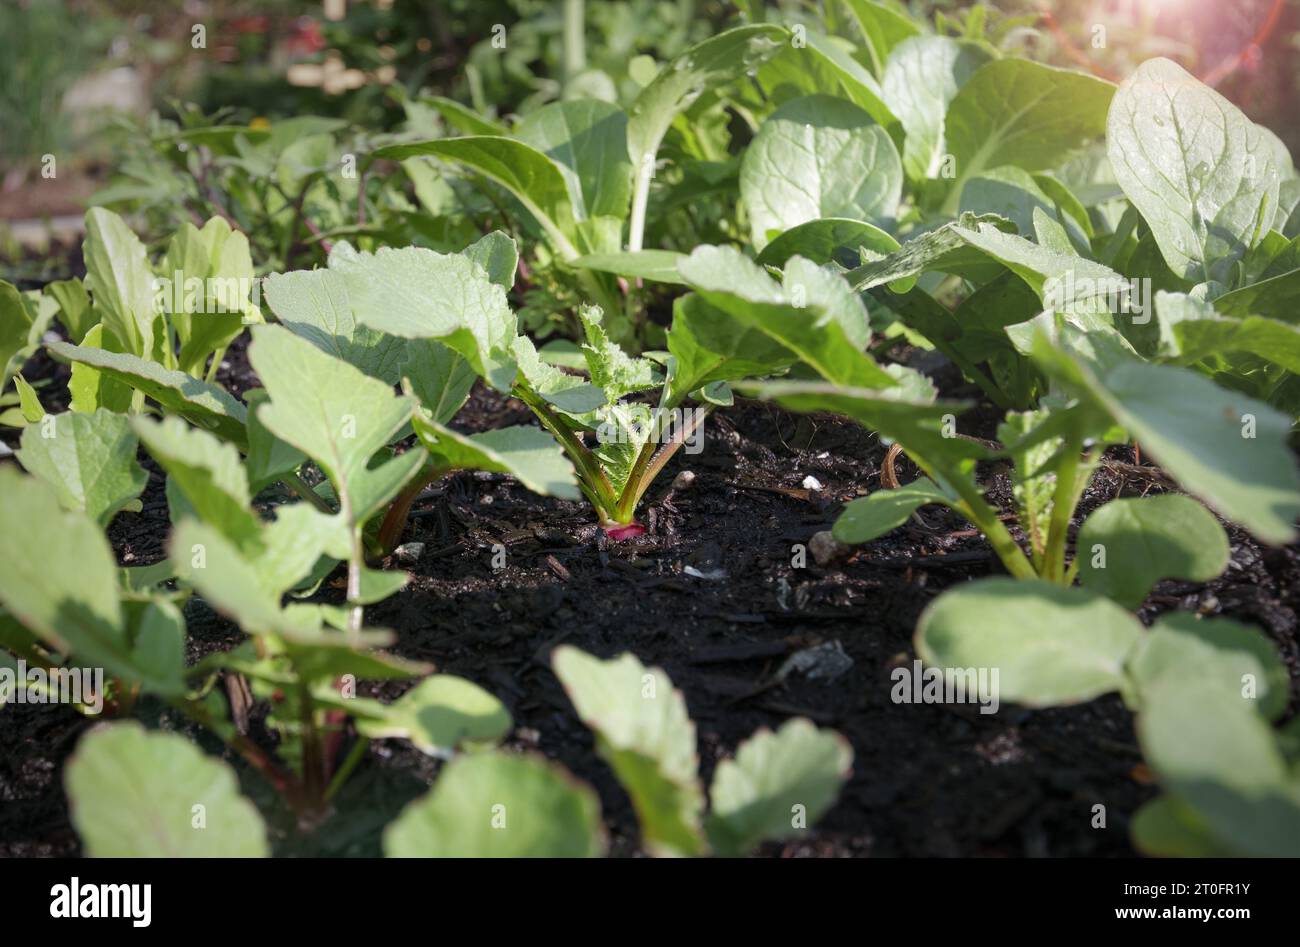 Many red radish seedling in garden on sunny day. Rows of young radish plants in summer garden before thinning. Known as table radish or Raphanus sativ Stock Photo